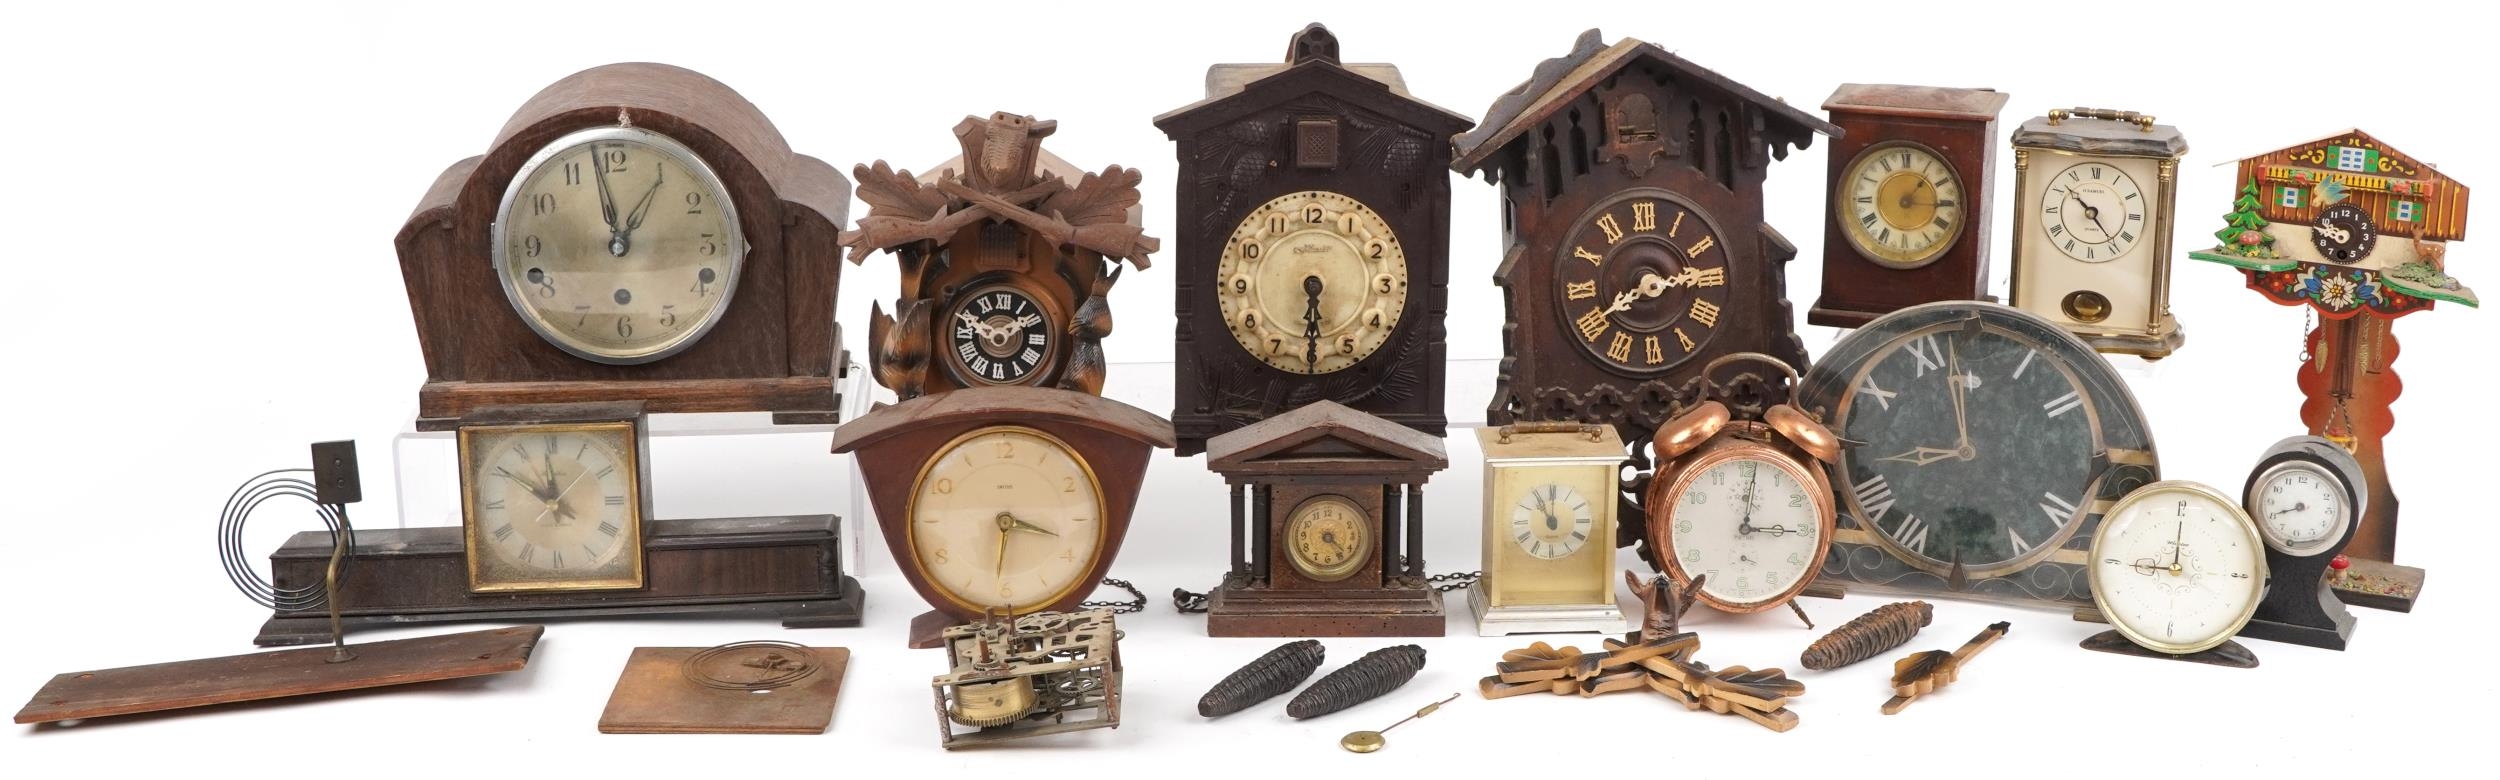 Early 20th century and later clocks including cuckoo, oak cased Westminster chiming and Smiths